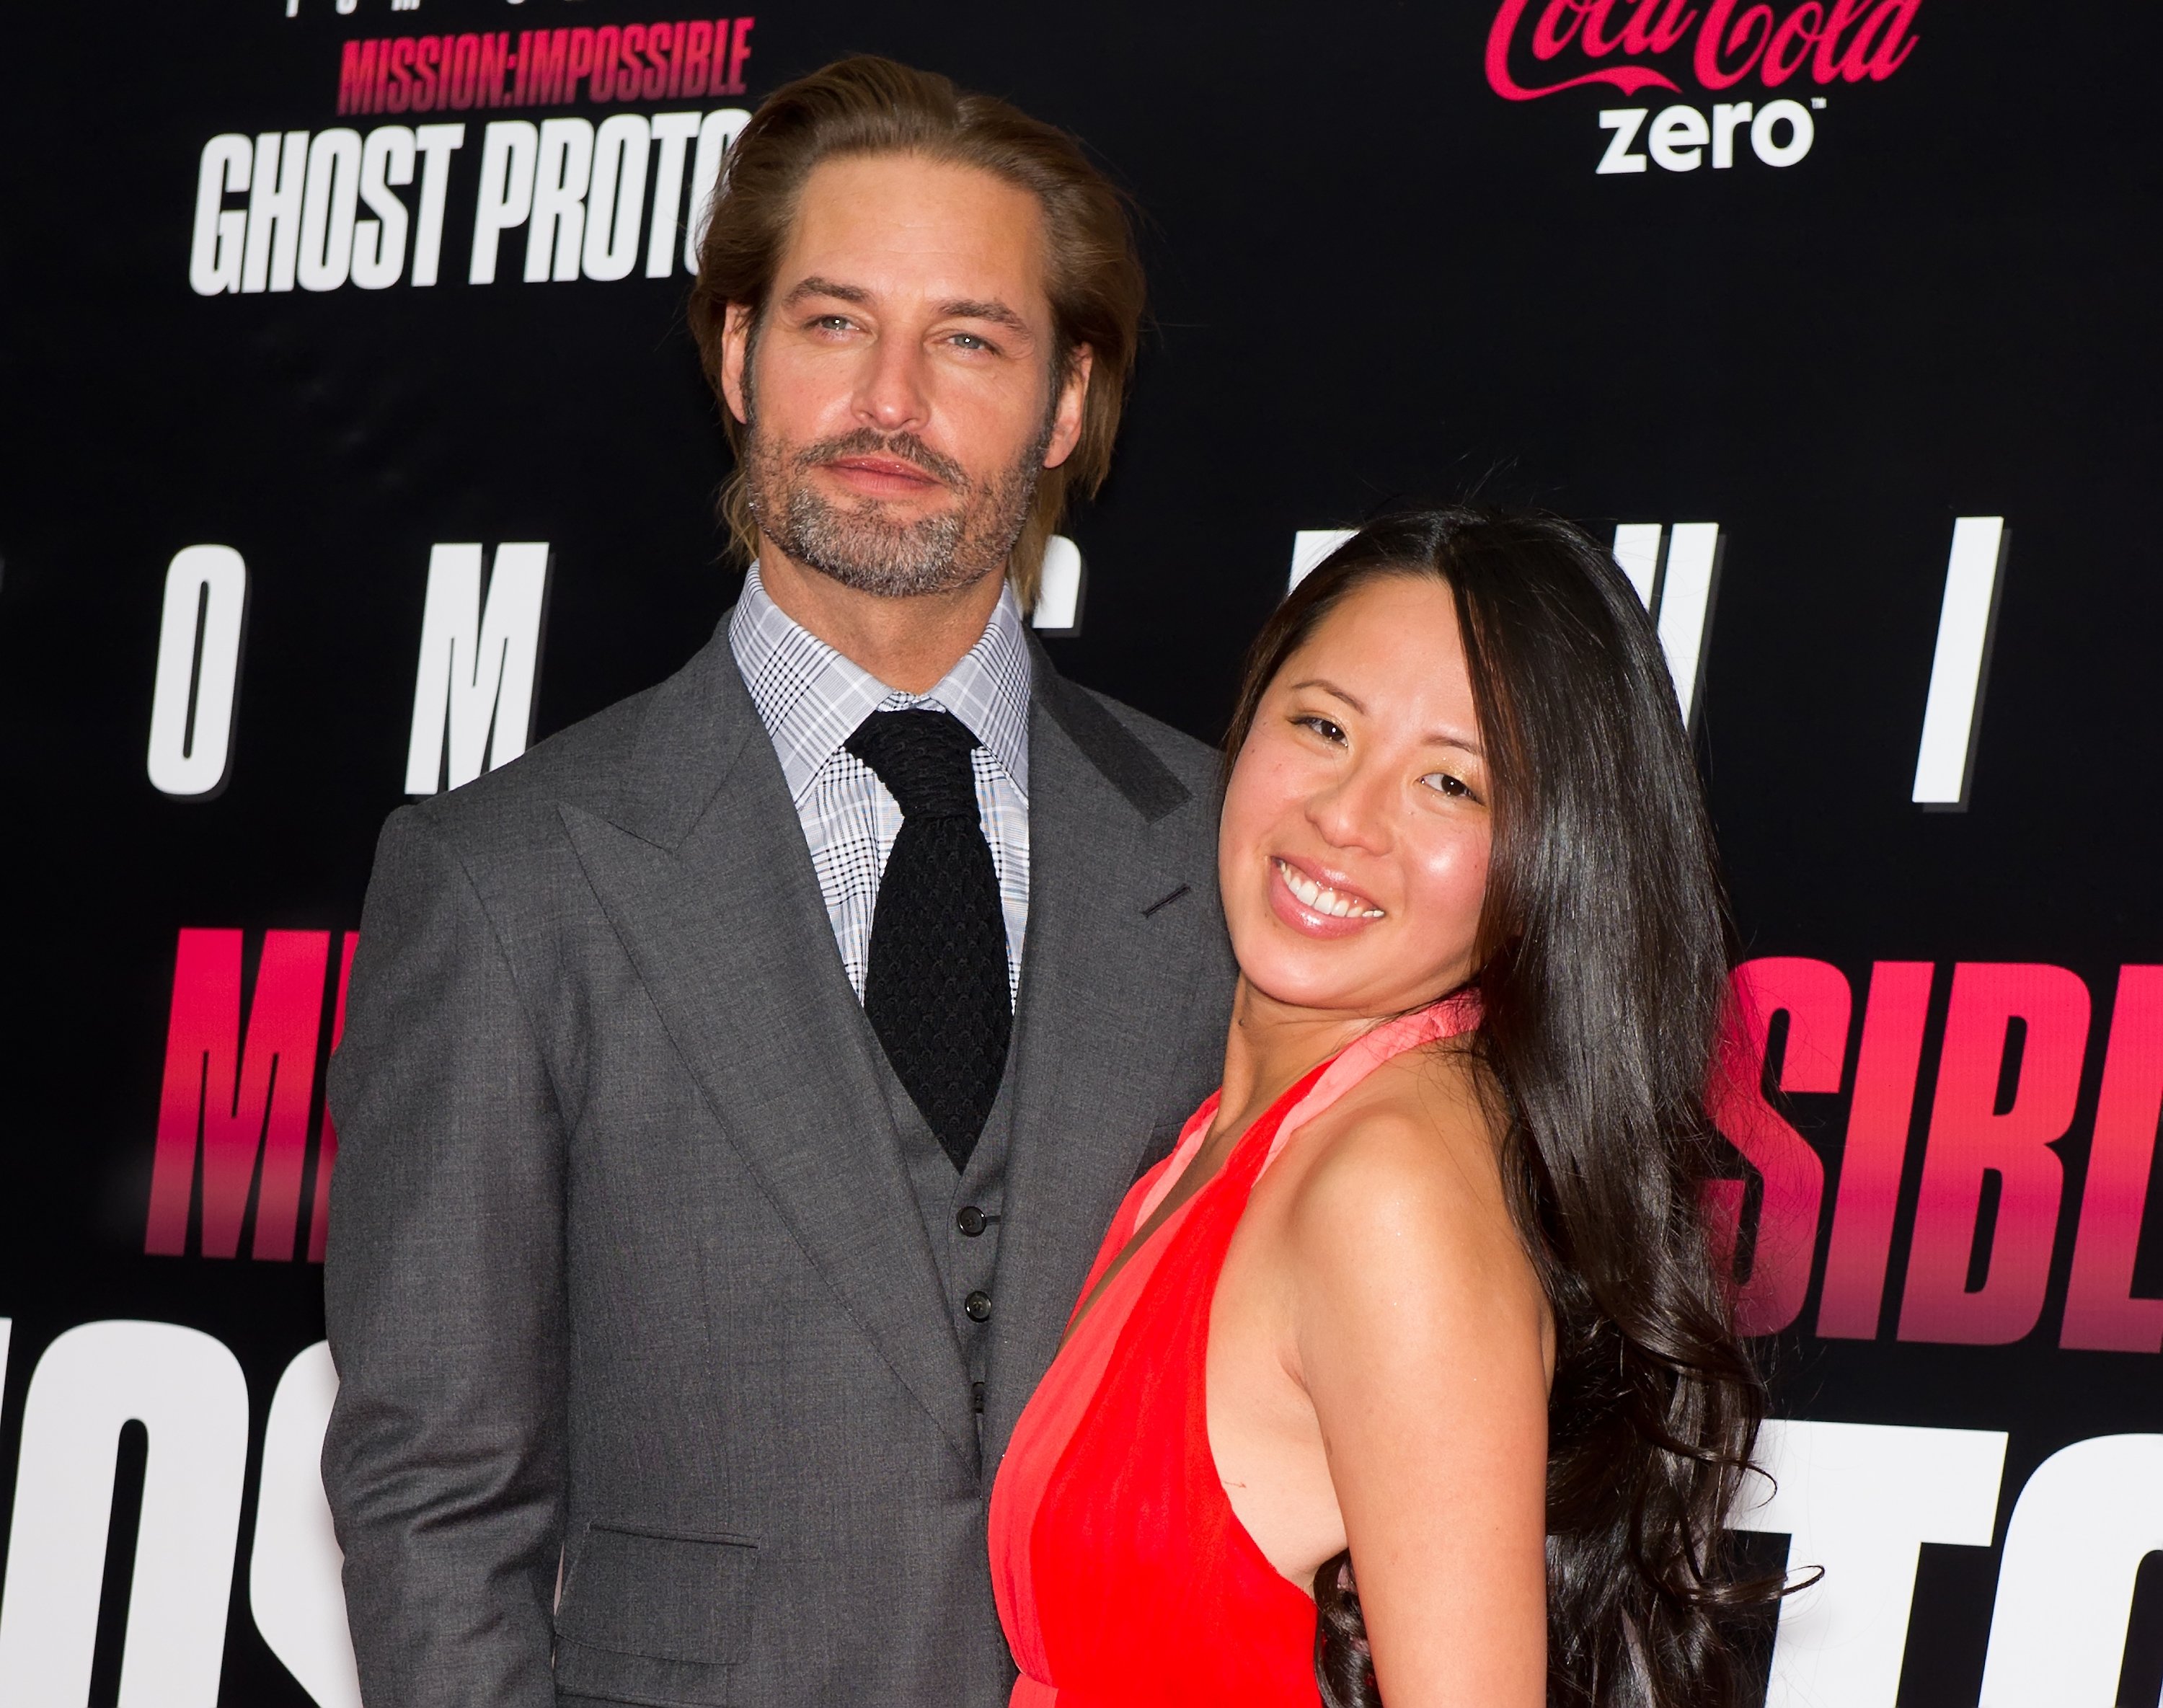 Josh Holloway and wife Yessica Kumala at the Ziegfeld Theatre on December 19, 2011, in New York City. | Source: Getty Images